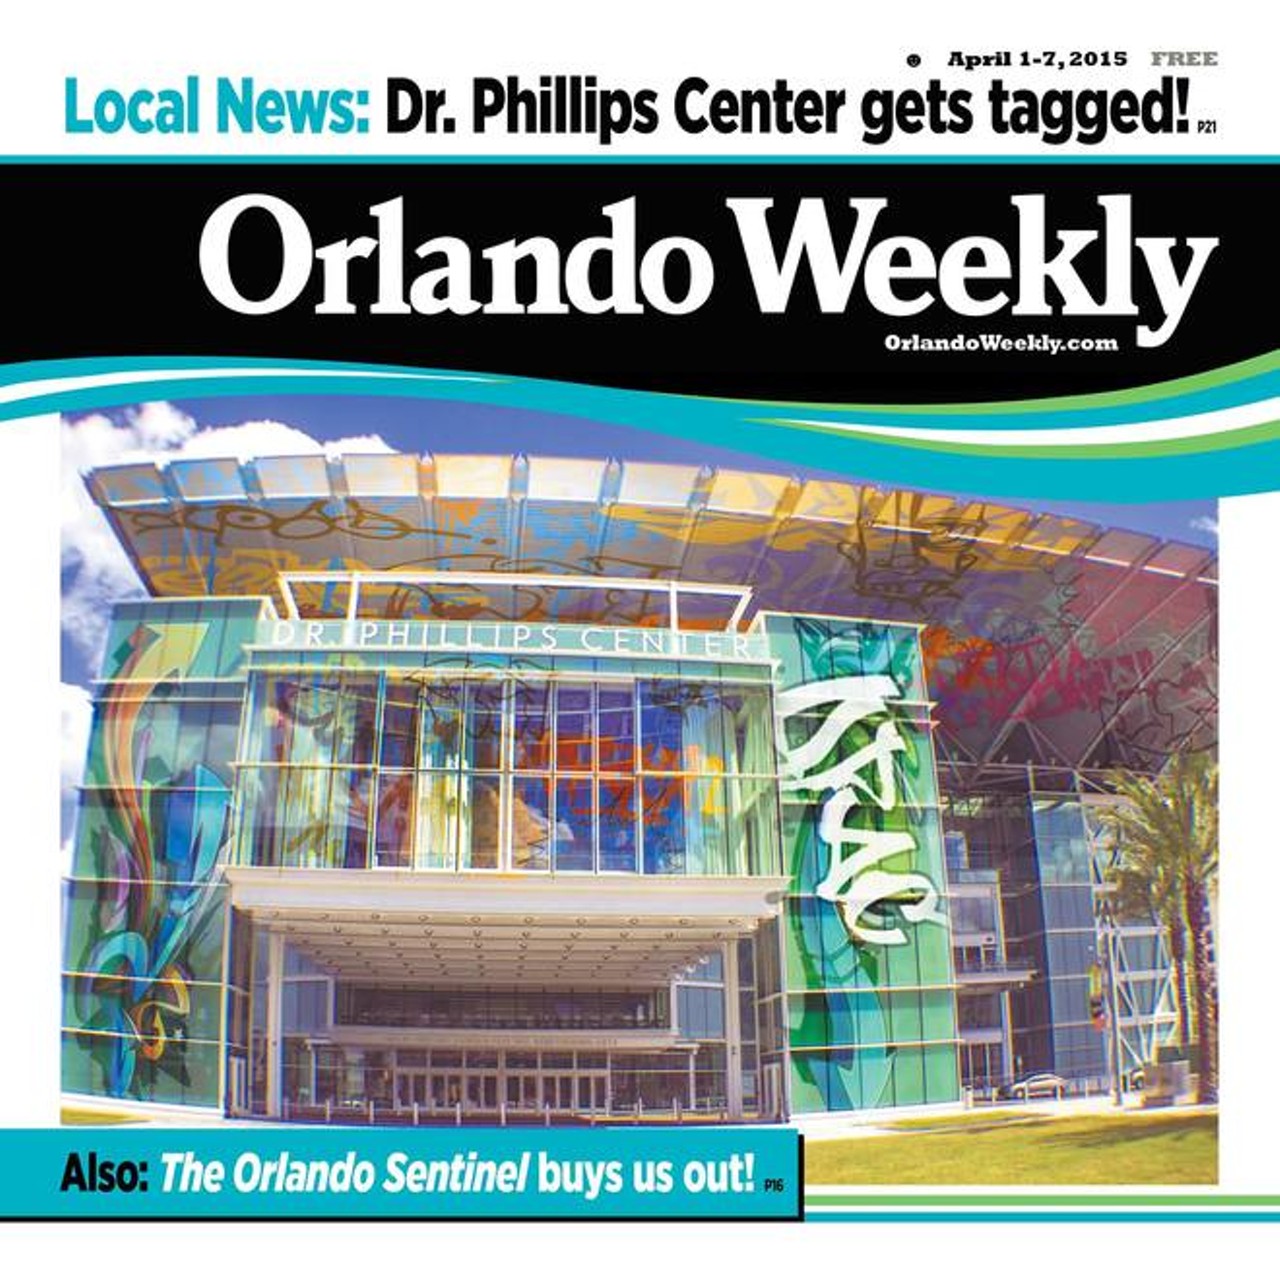 The April Fool&#146;s Cover
I&#146;ve been begging to do a joke cover for a few years, so I&#146;m glad our editor finally came around. This one went through multiple iterations, but eventually, we settled on the idea of playfully ripping off the Orlando Sentinel and claiming they bought us. Too many people thought it was real. Womp womp.